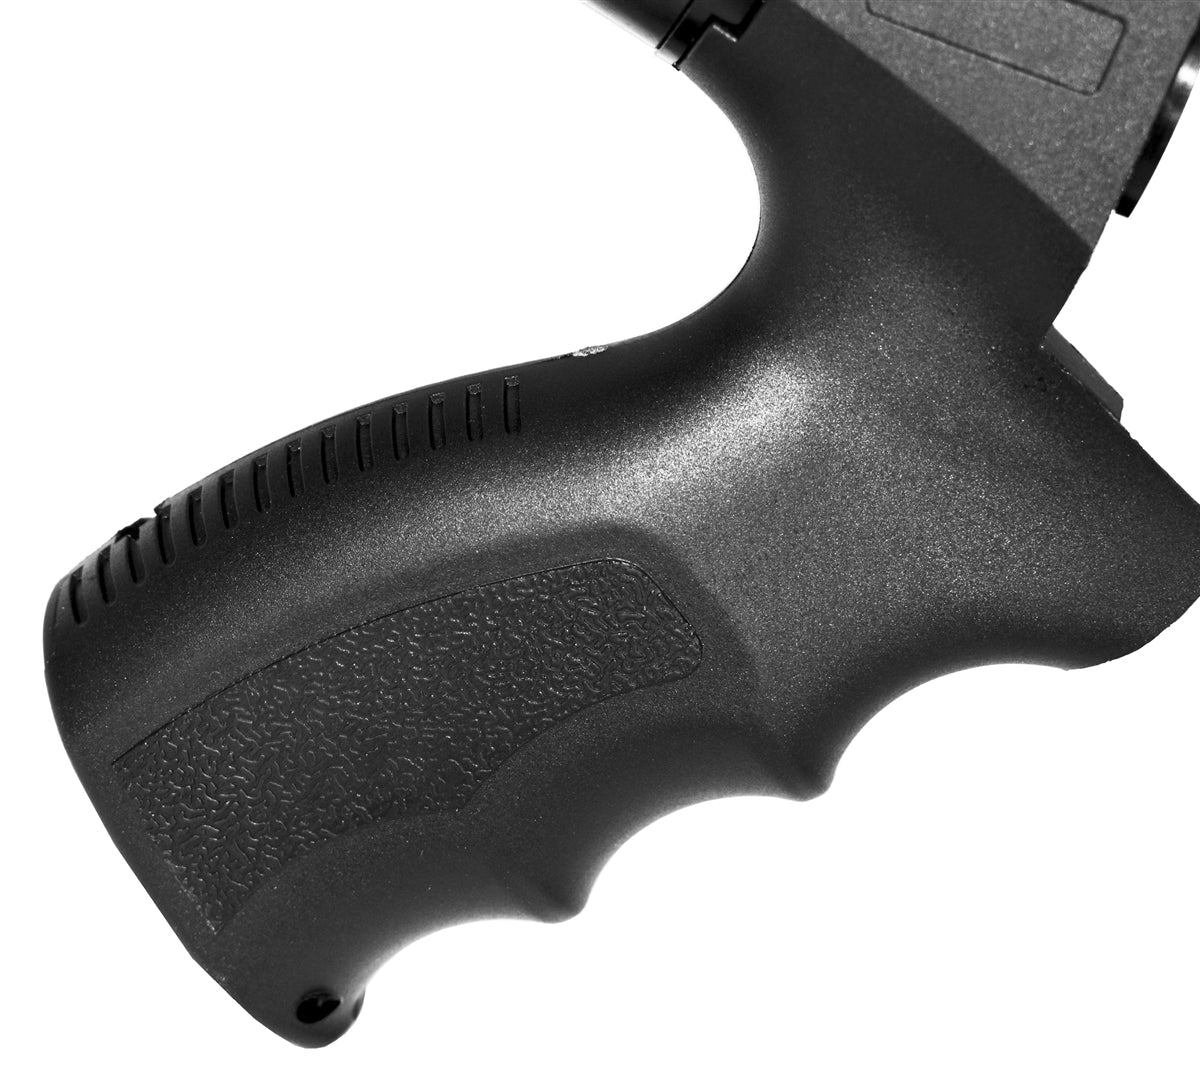 Tactical Adjustable Stock With Butt Pad Compatible With Mossberg 590A1 12 Gauge. - TRINITY SUPPLY INC